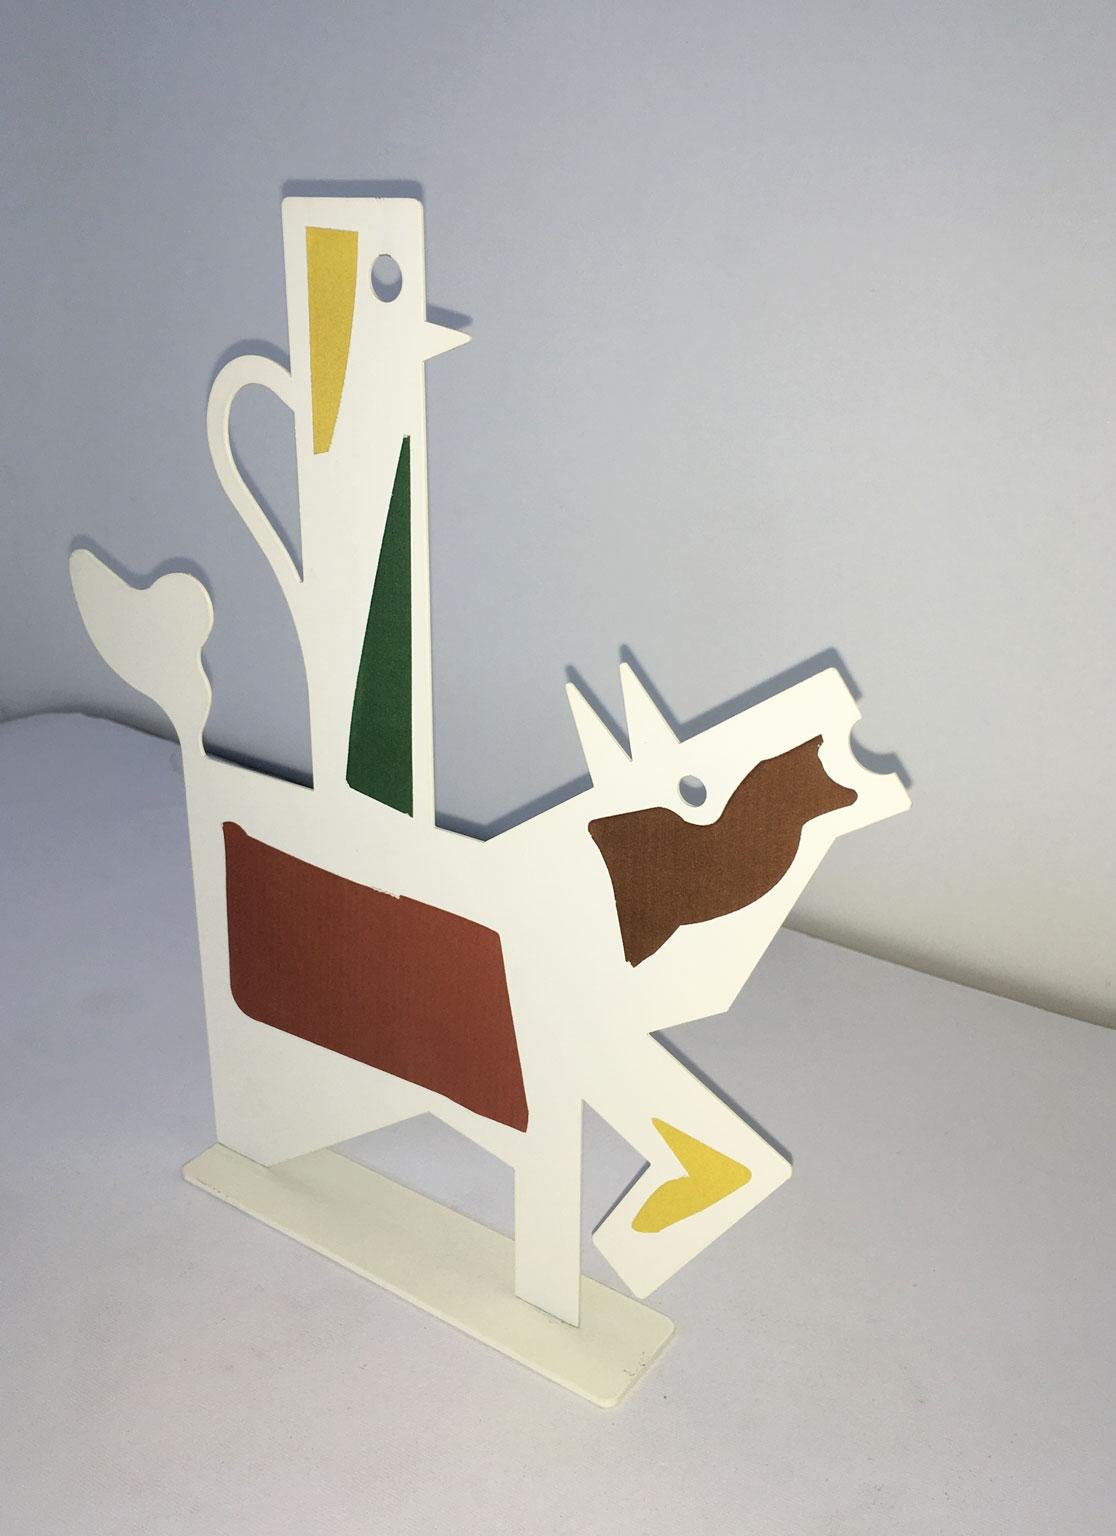 Italy 1980 Riccardo Dalisi White Painted Metal Sculpture Muccacaffè For Sale 3